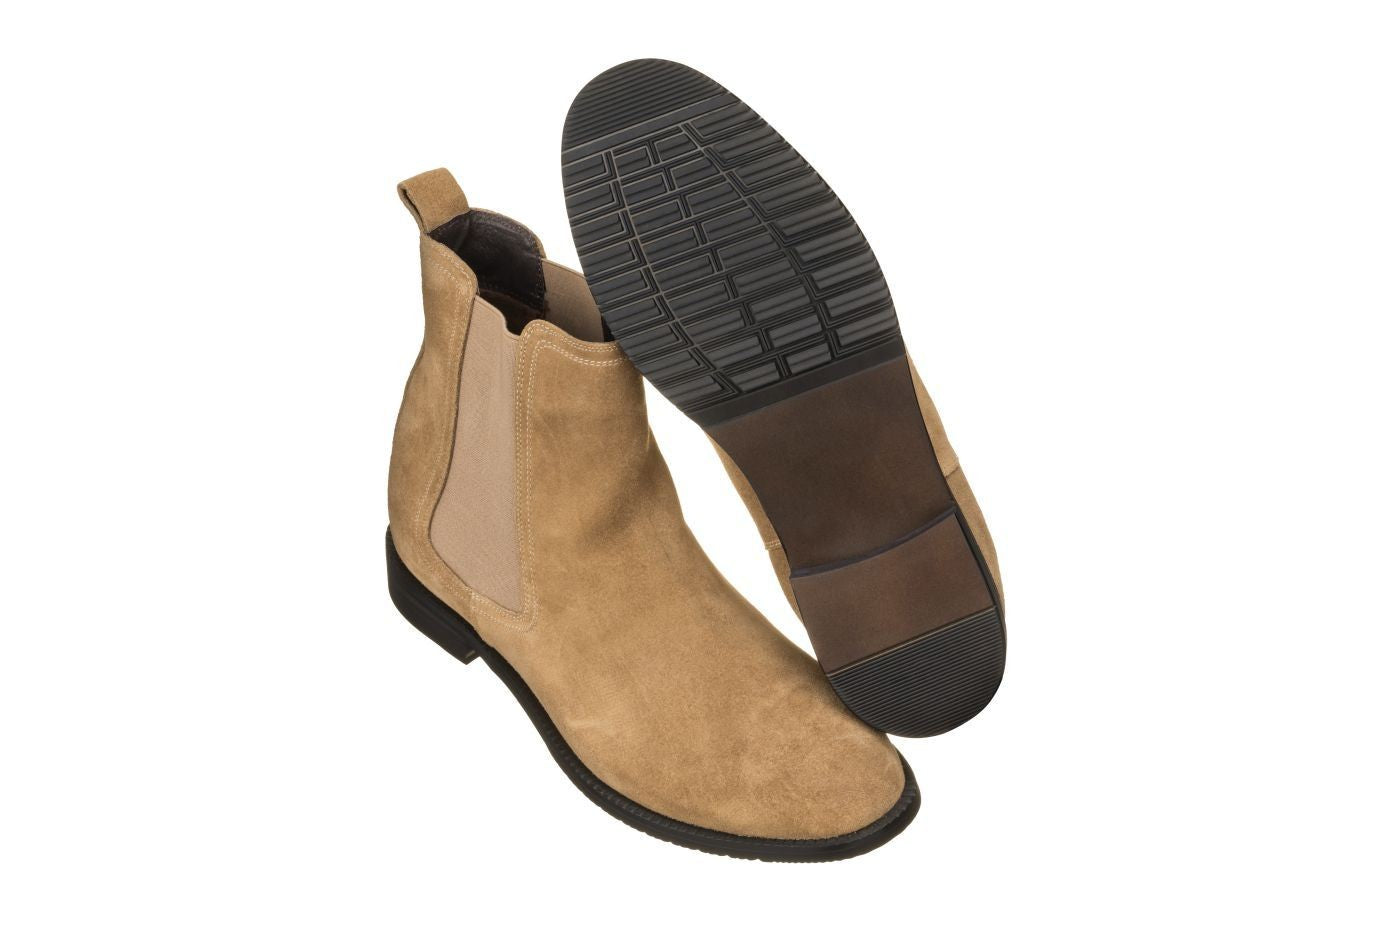 Elevator shoes height increase CALTO - K33091 - 2.9 Inches Taller (Khaki Brown) - Suede Chelsea Boot